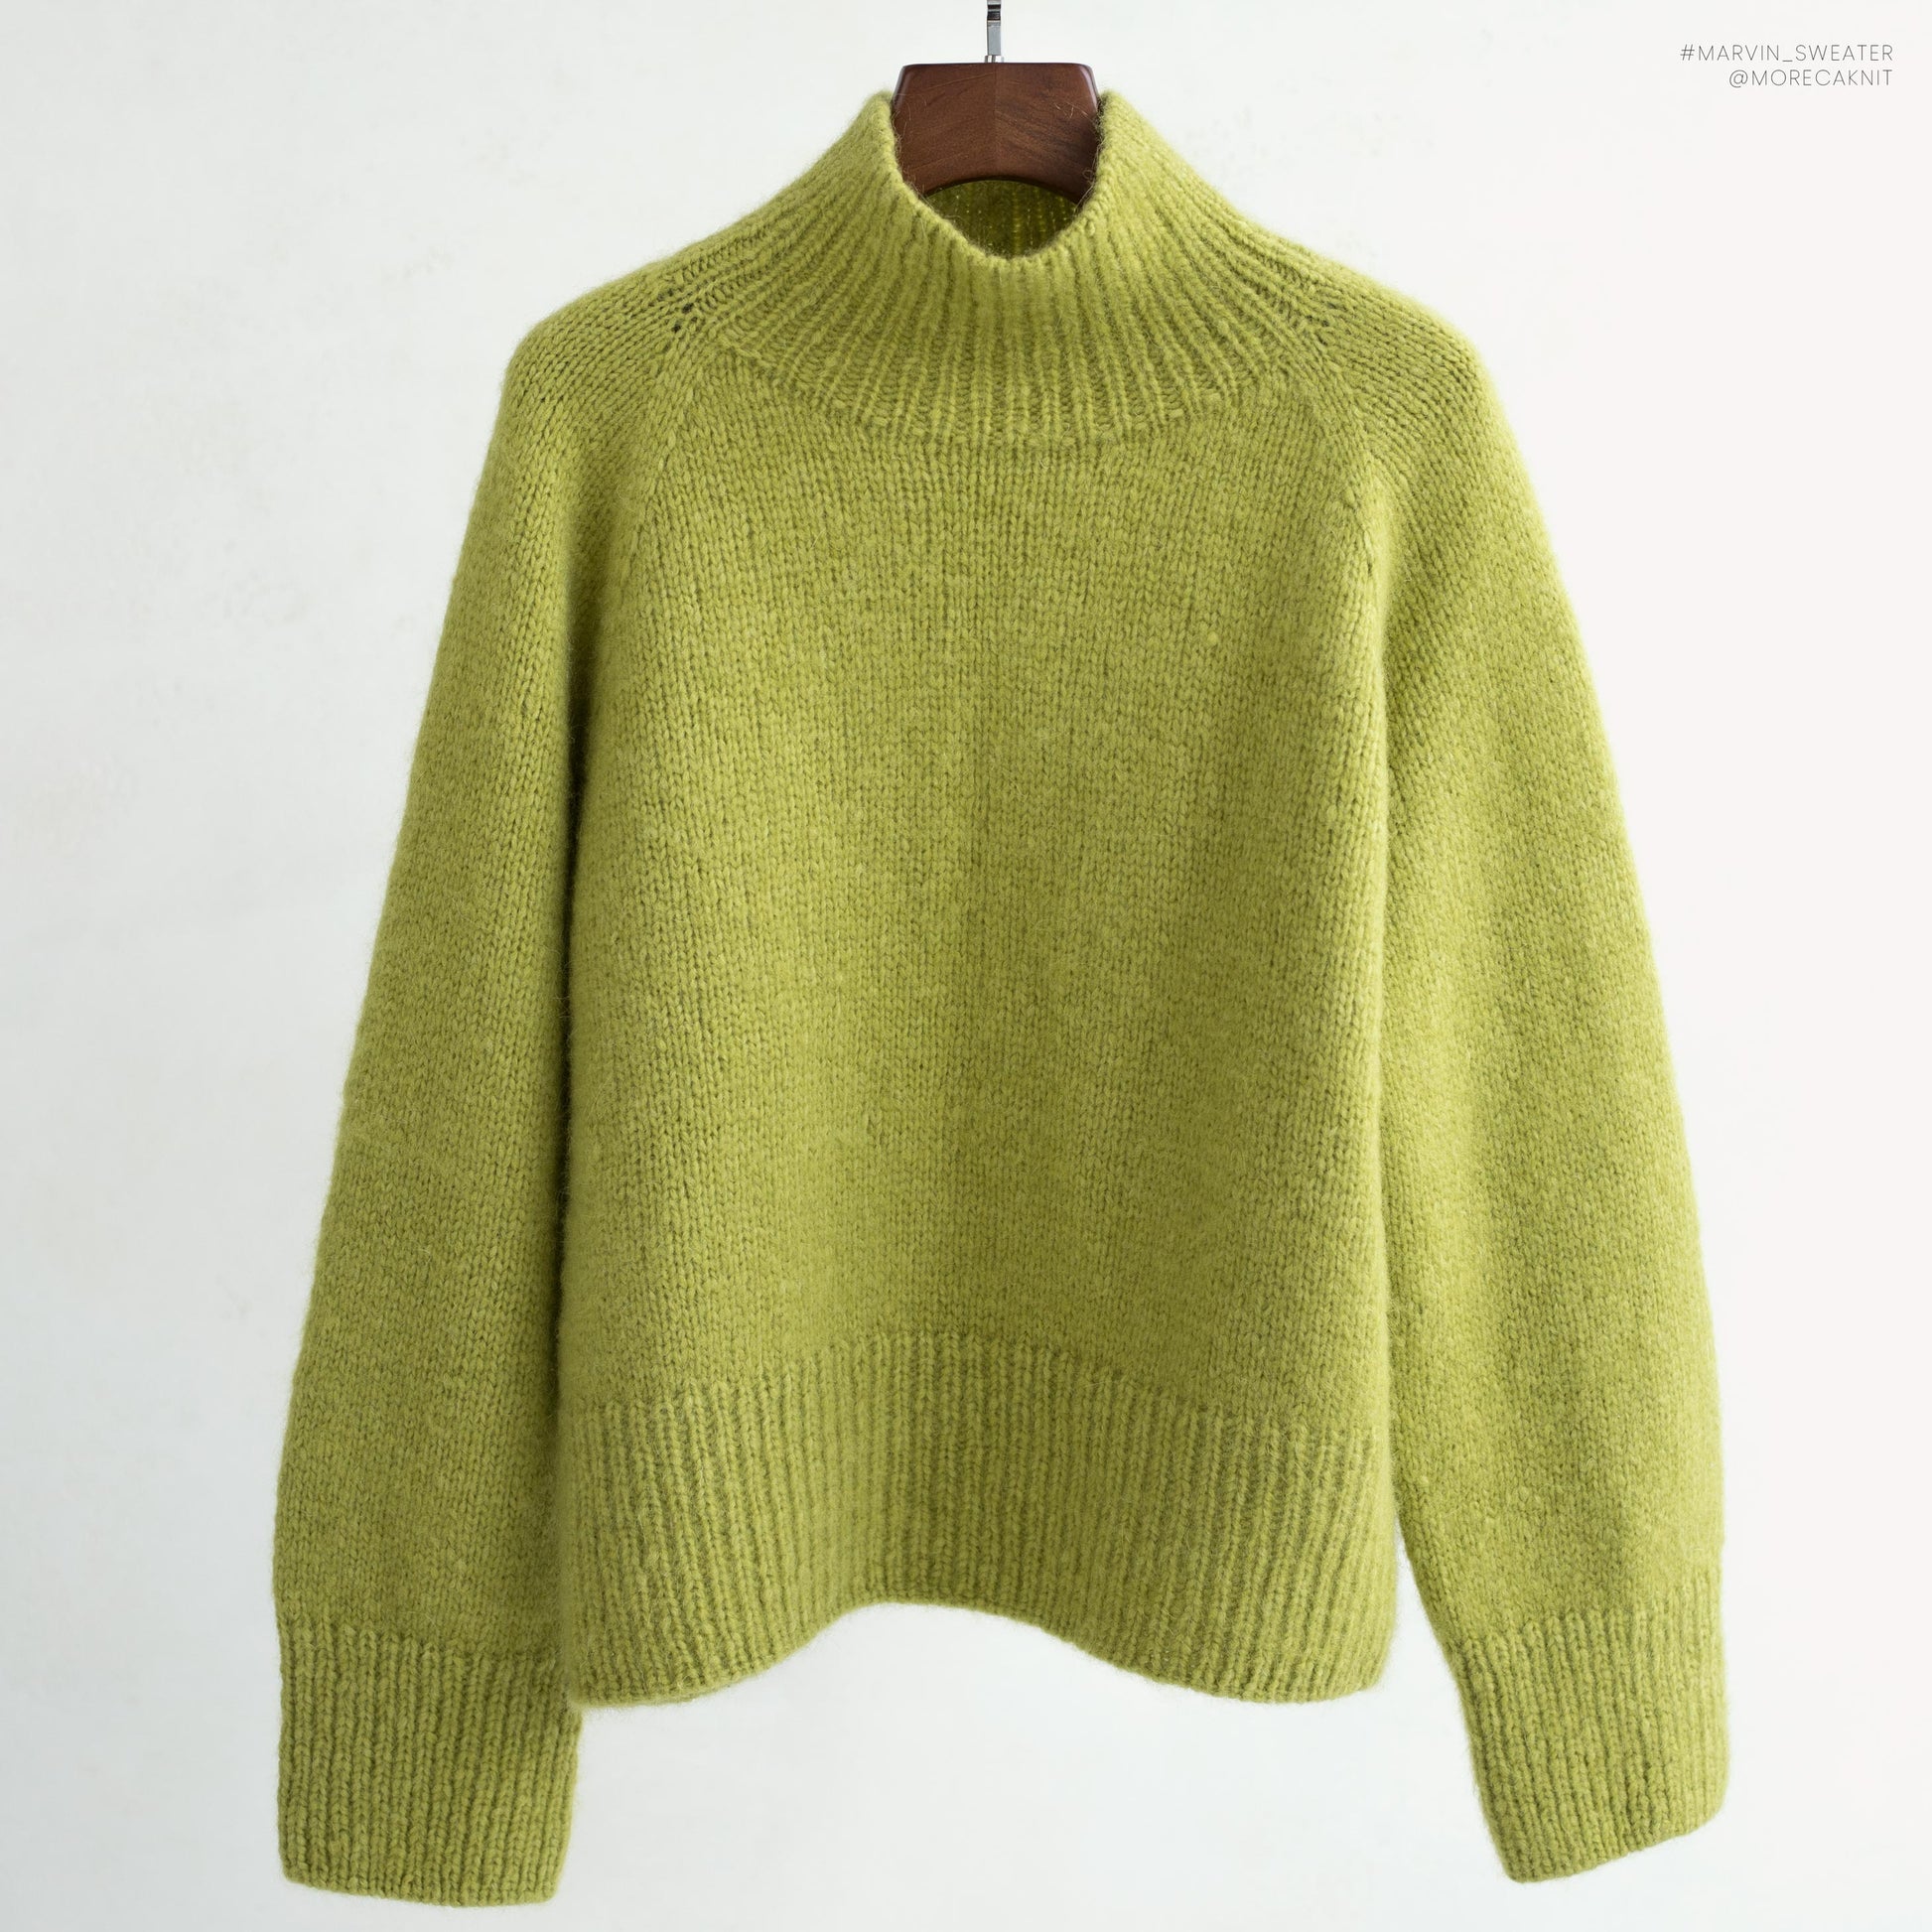 Buy knitting pattern for Marvin Sweater, with Italian bind-off and backward loop method